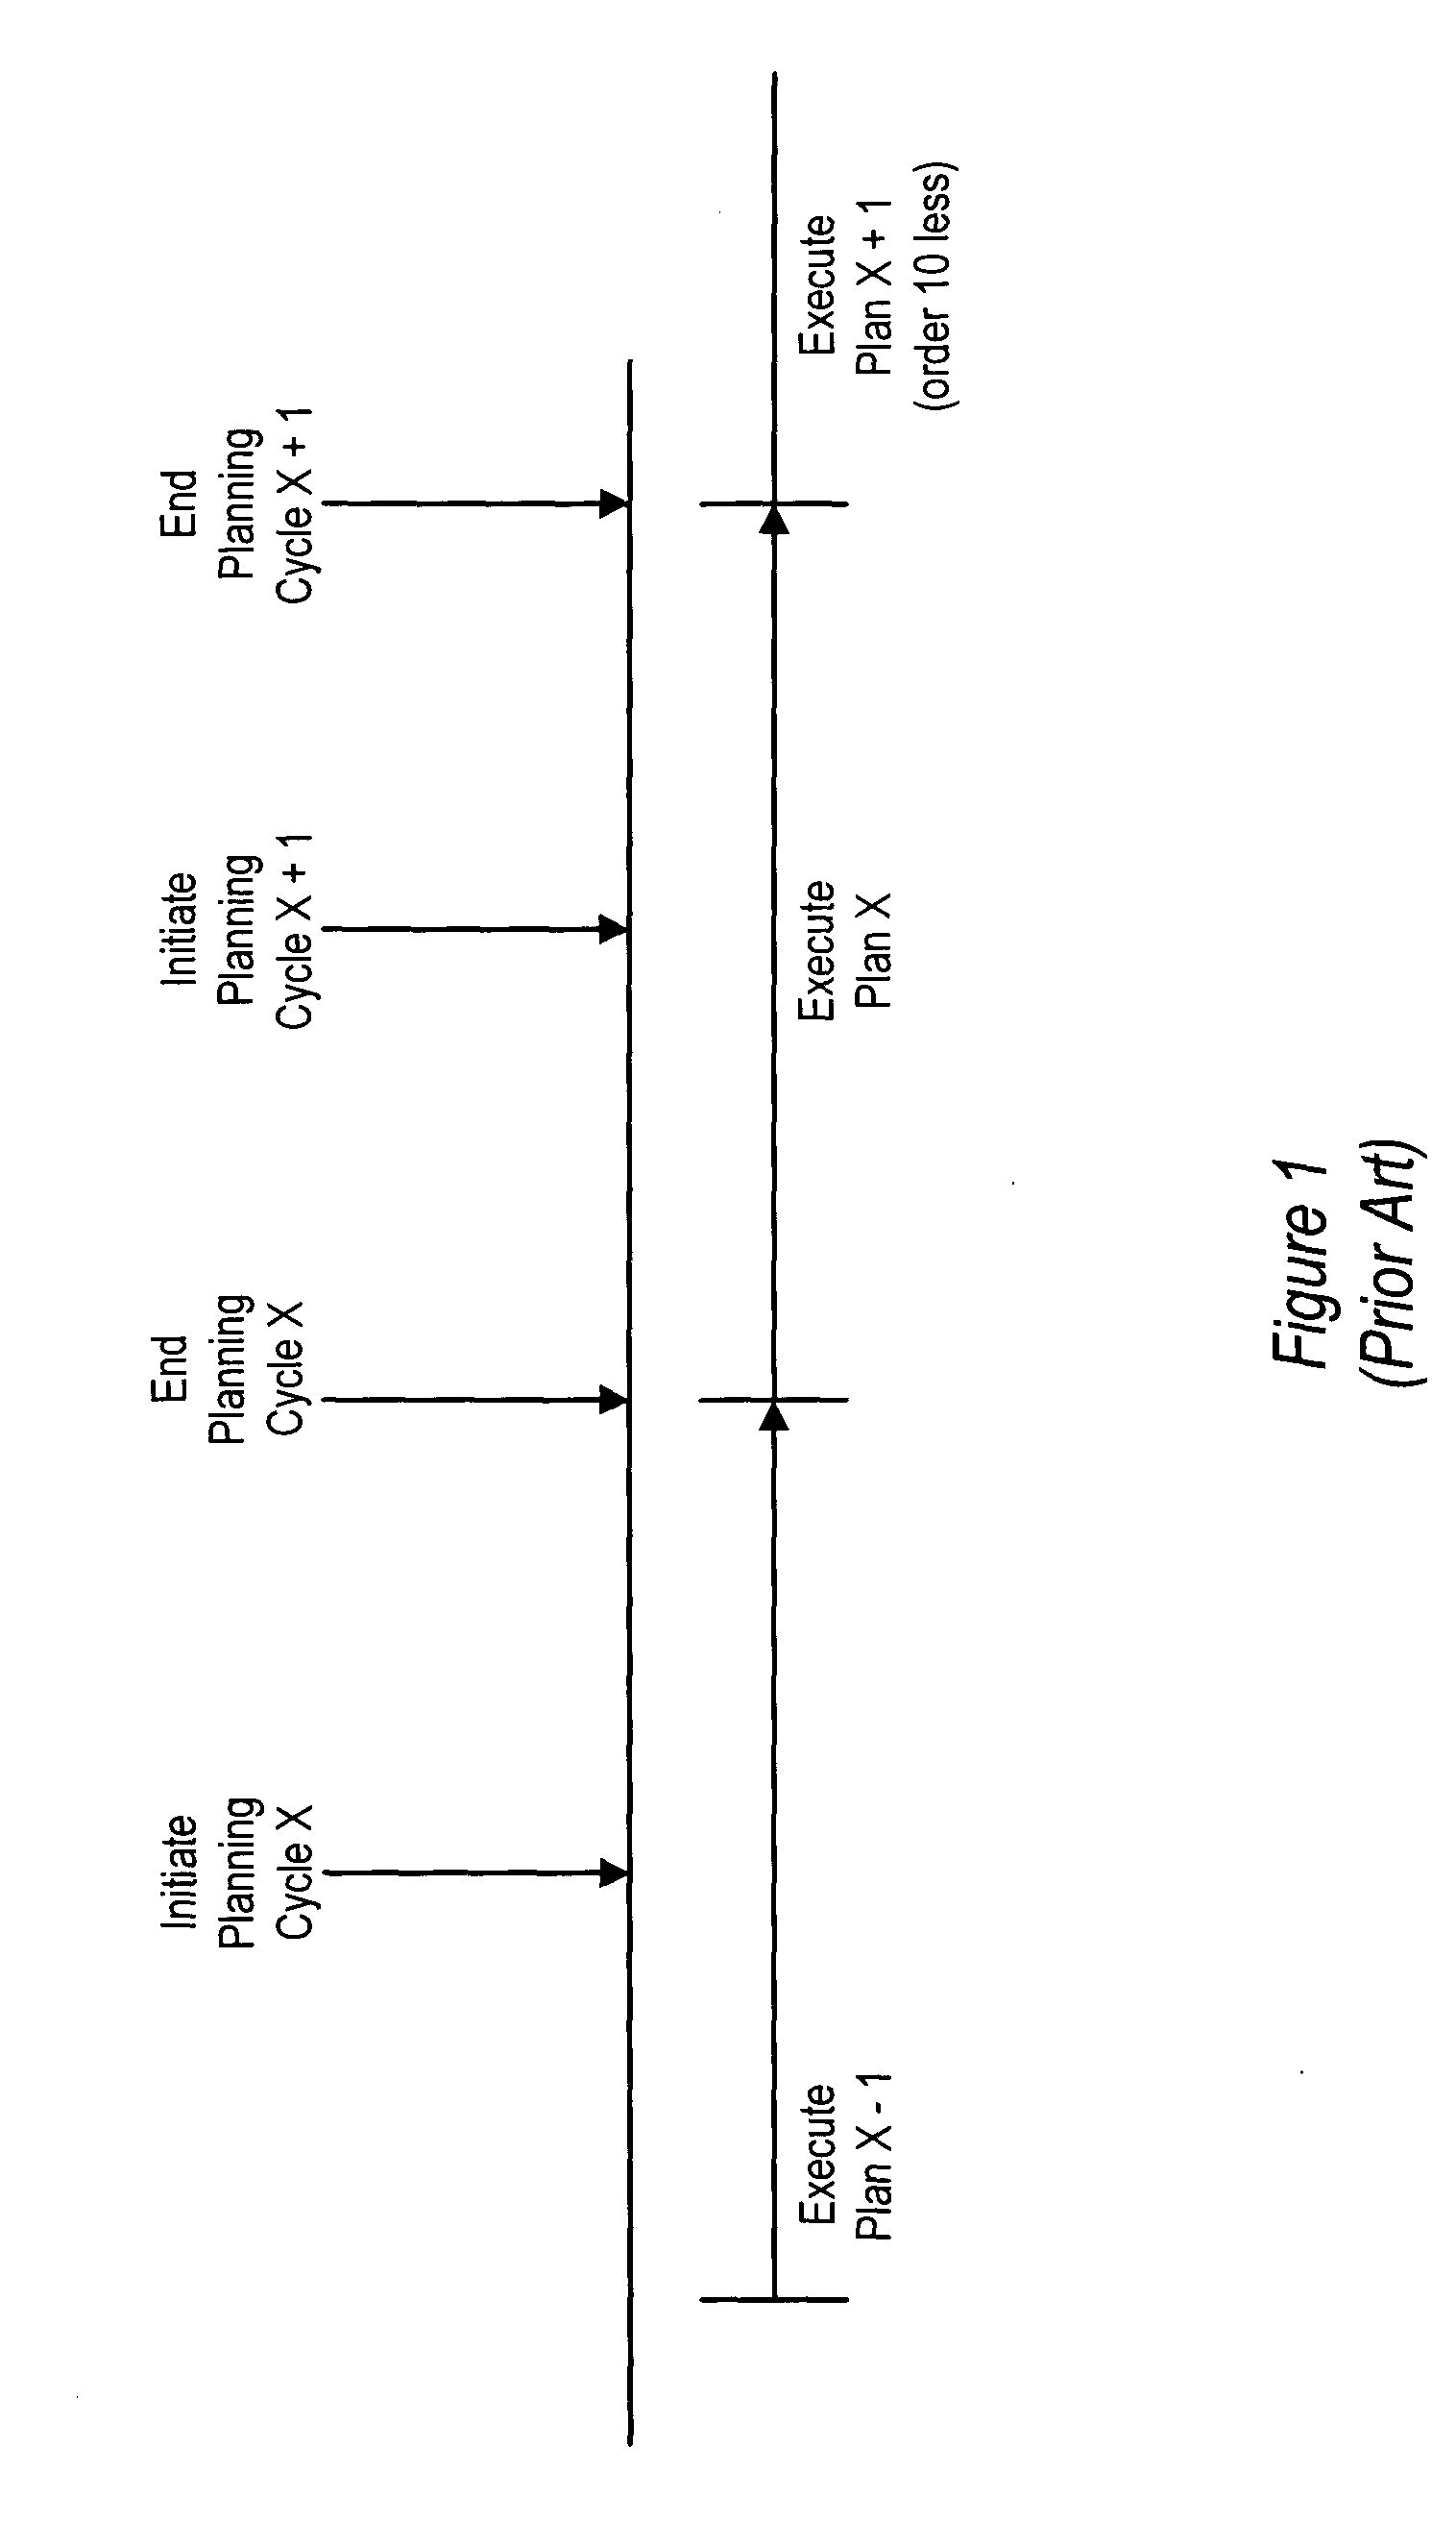 Synchronized production with dynamic logistics routing